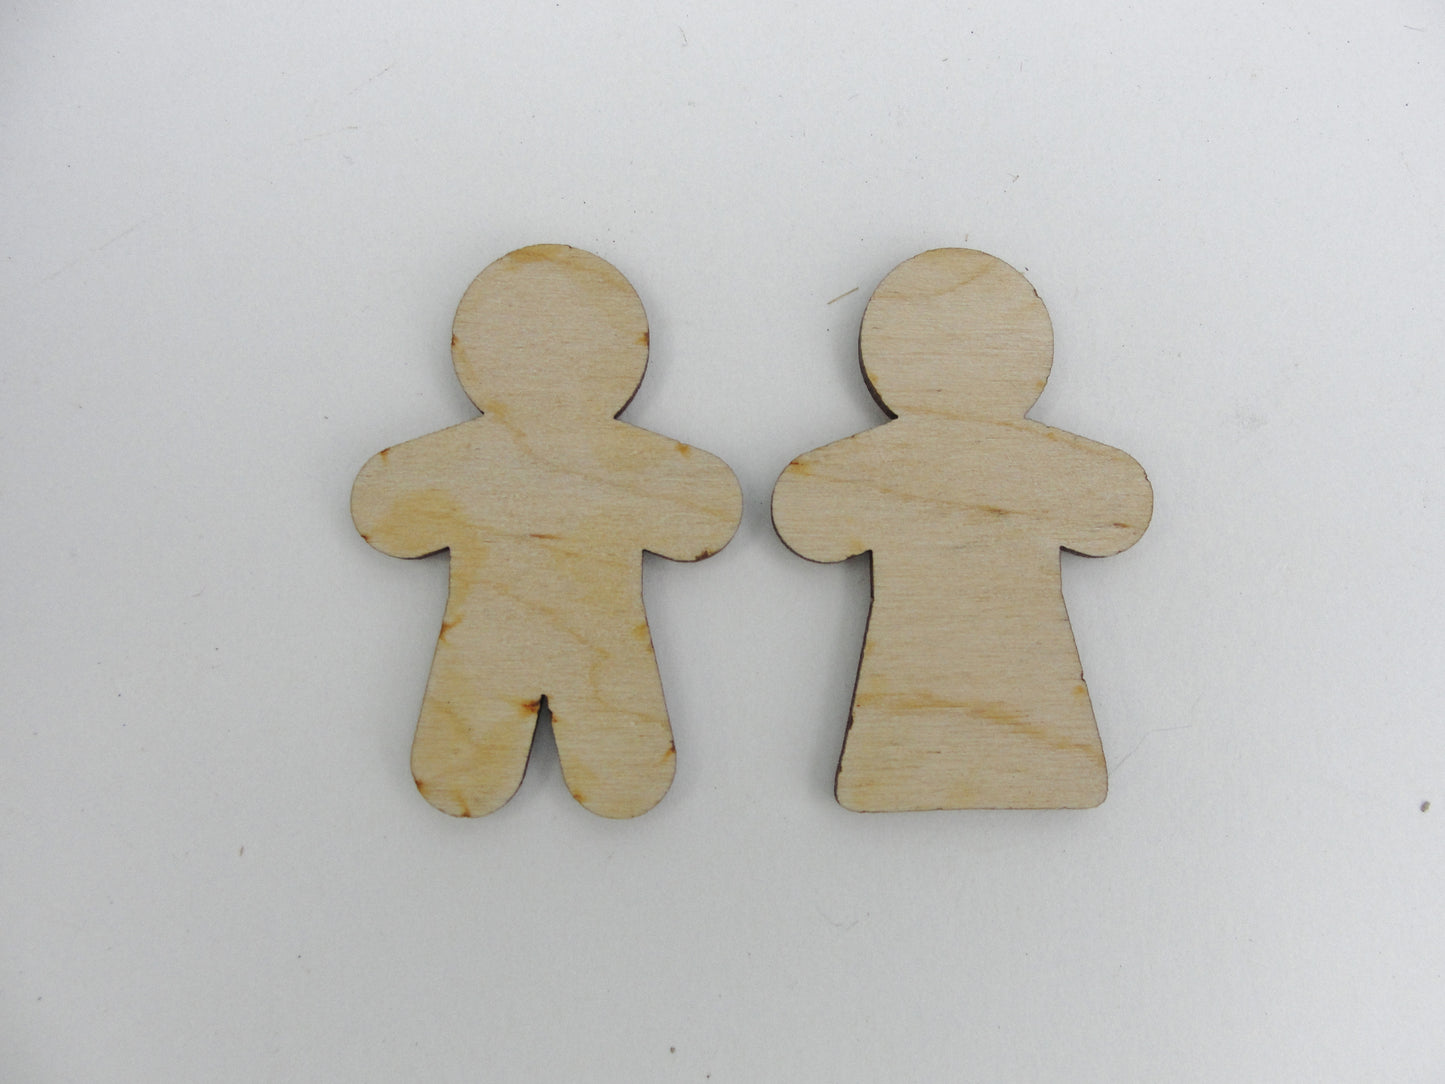 Wooden Gingerbread Man or Woman cutout set of 6